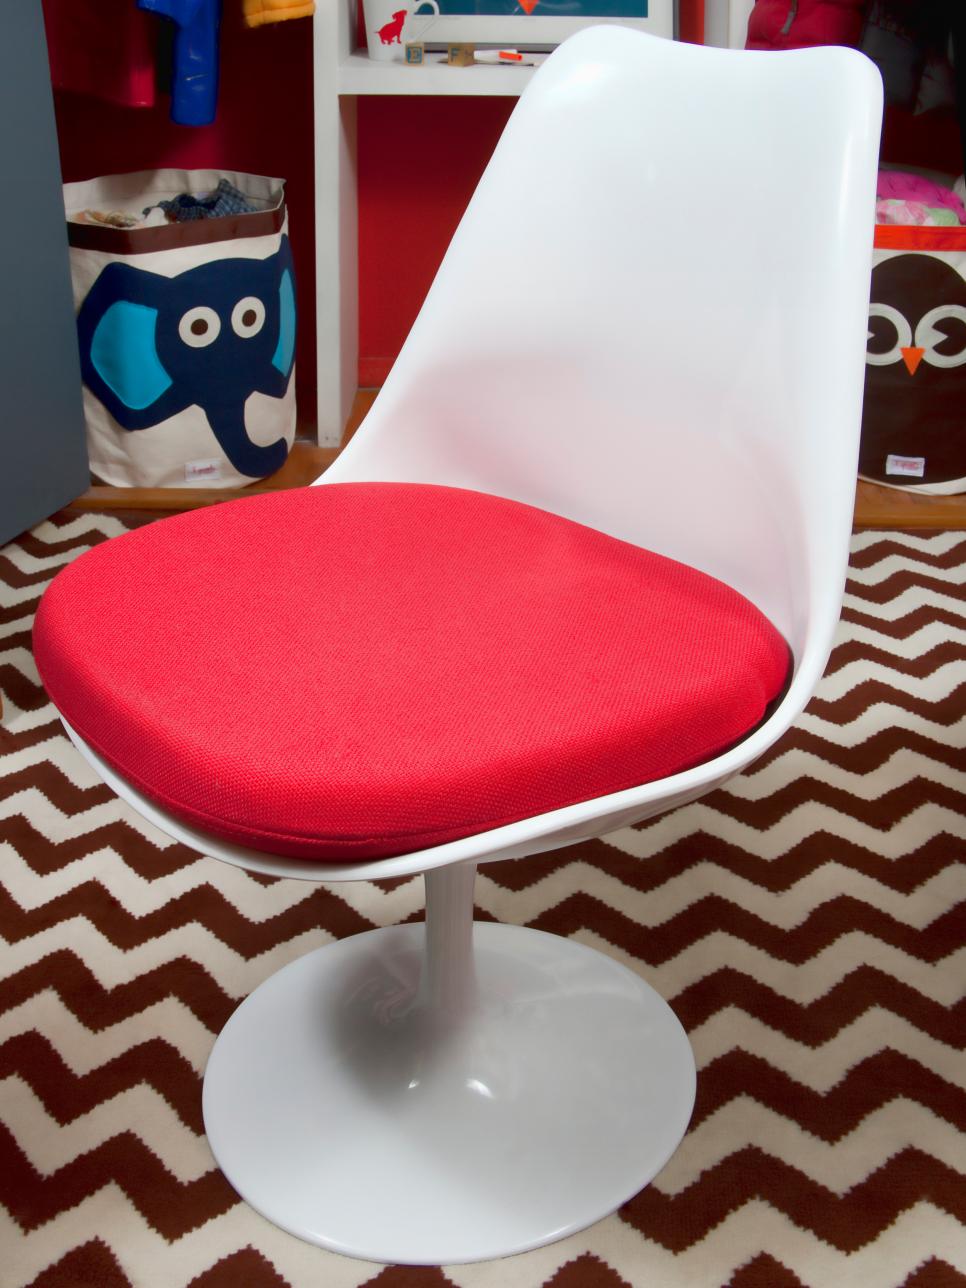 Tulip Chair in Child's Room